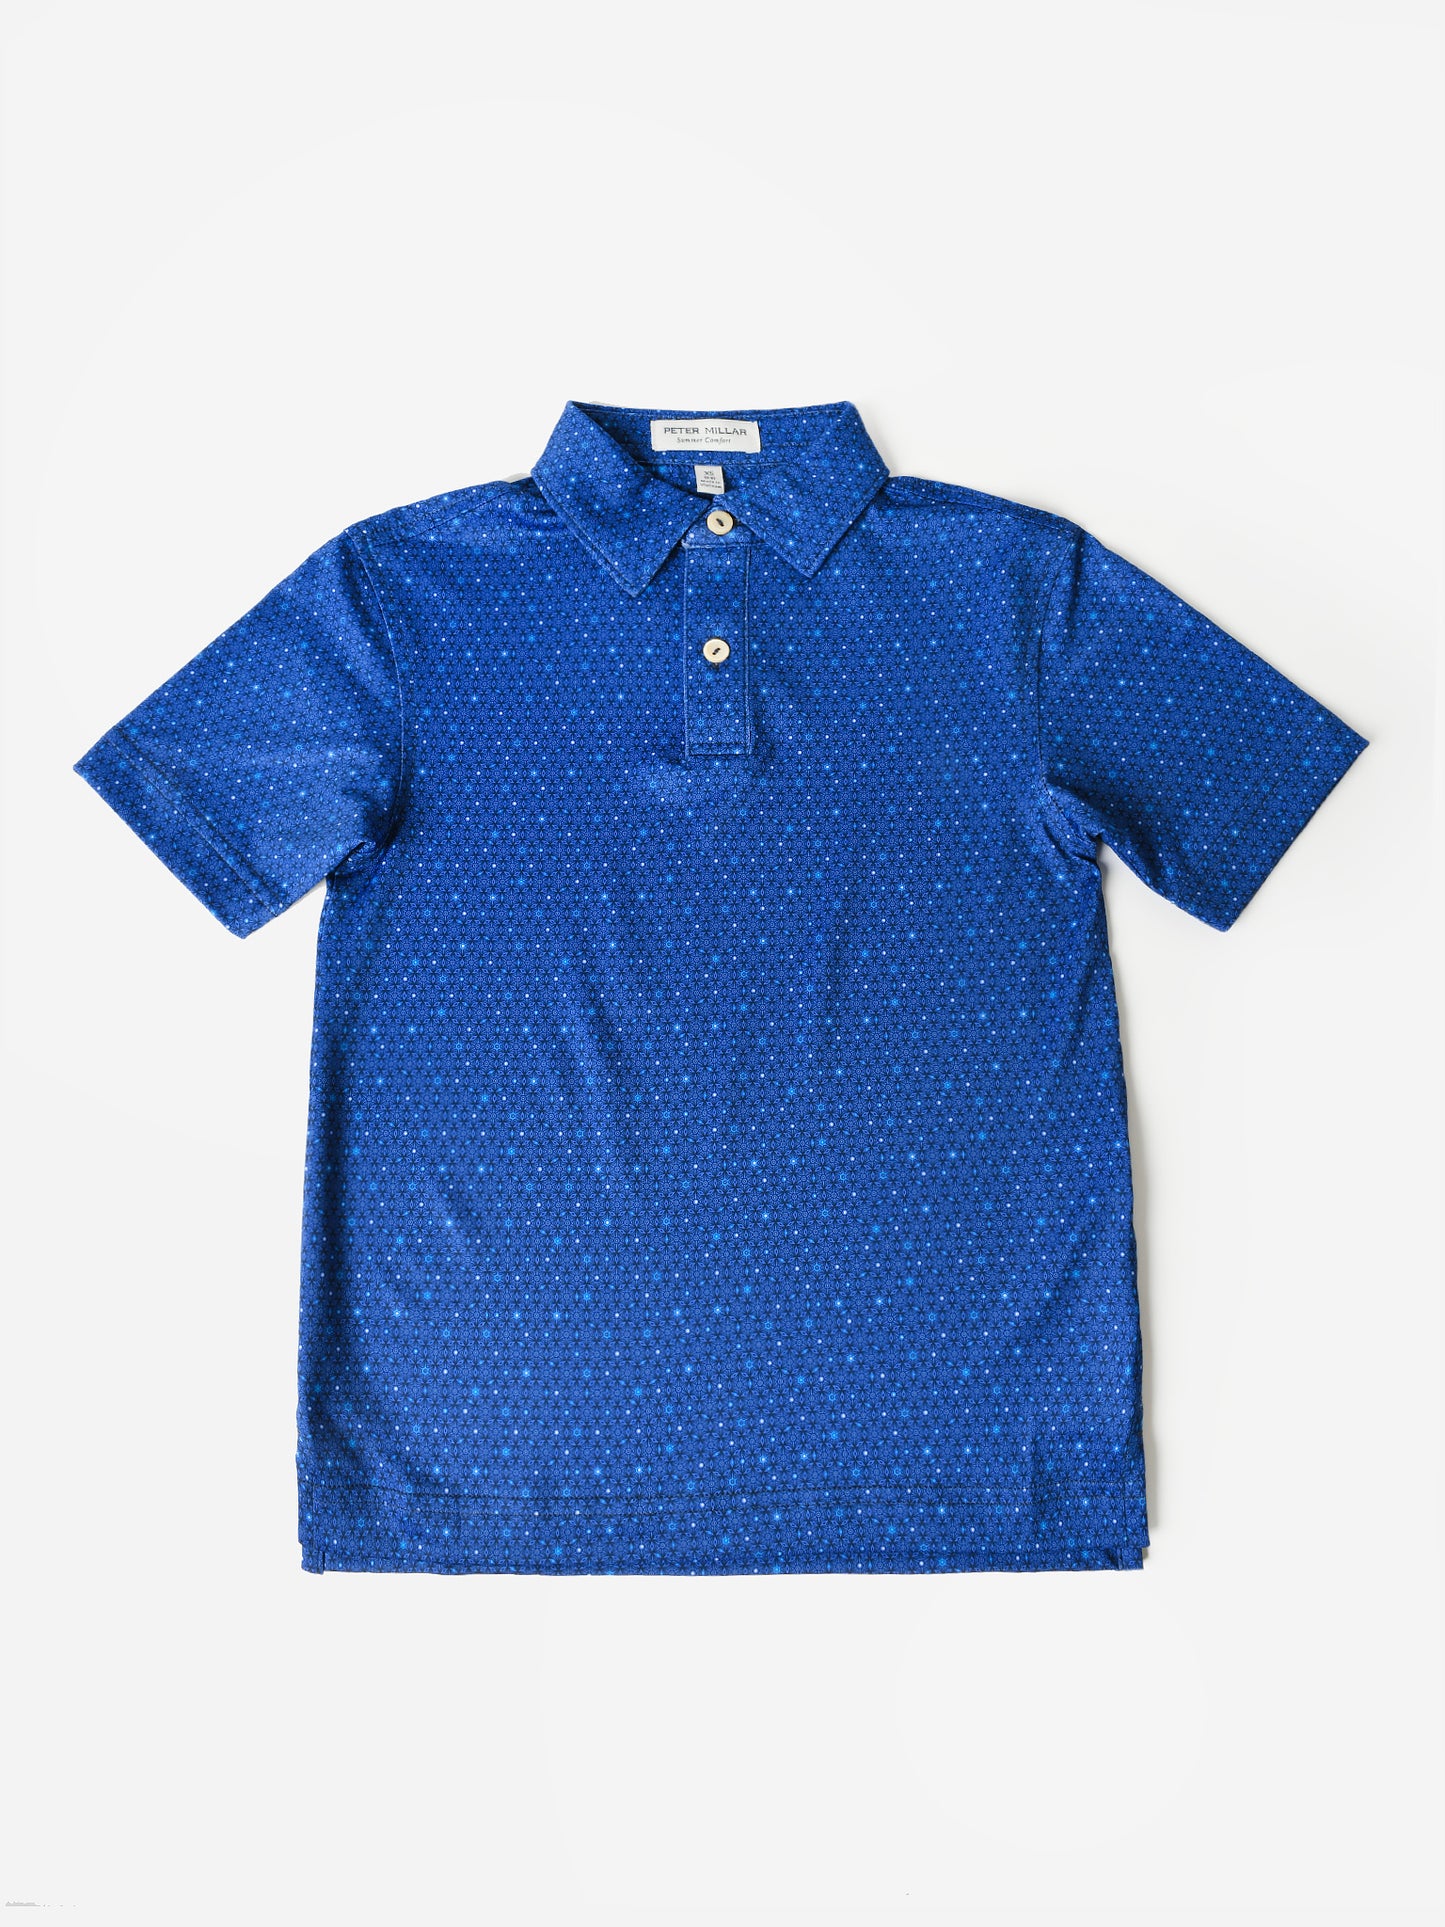 Peter Millar Youth Collection Boys' Avon Performance Jersey Polo